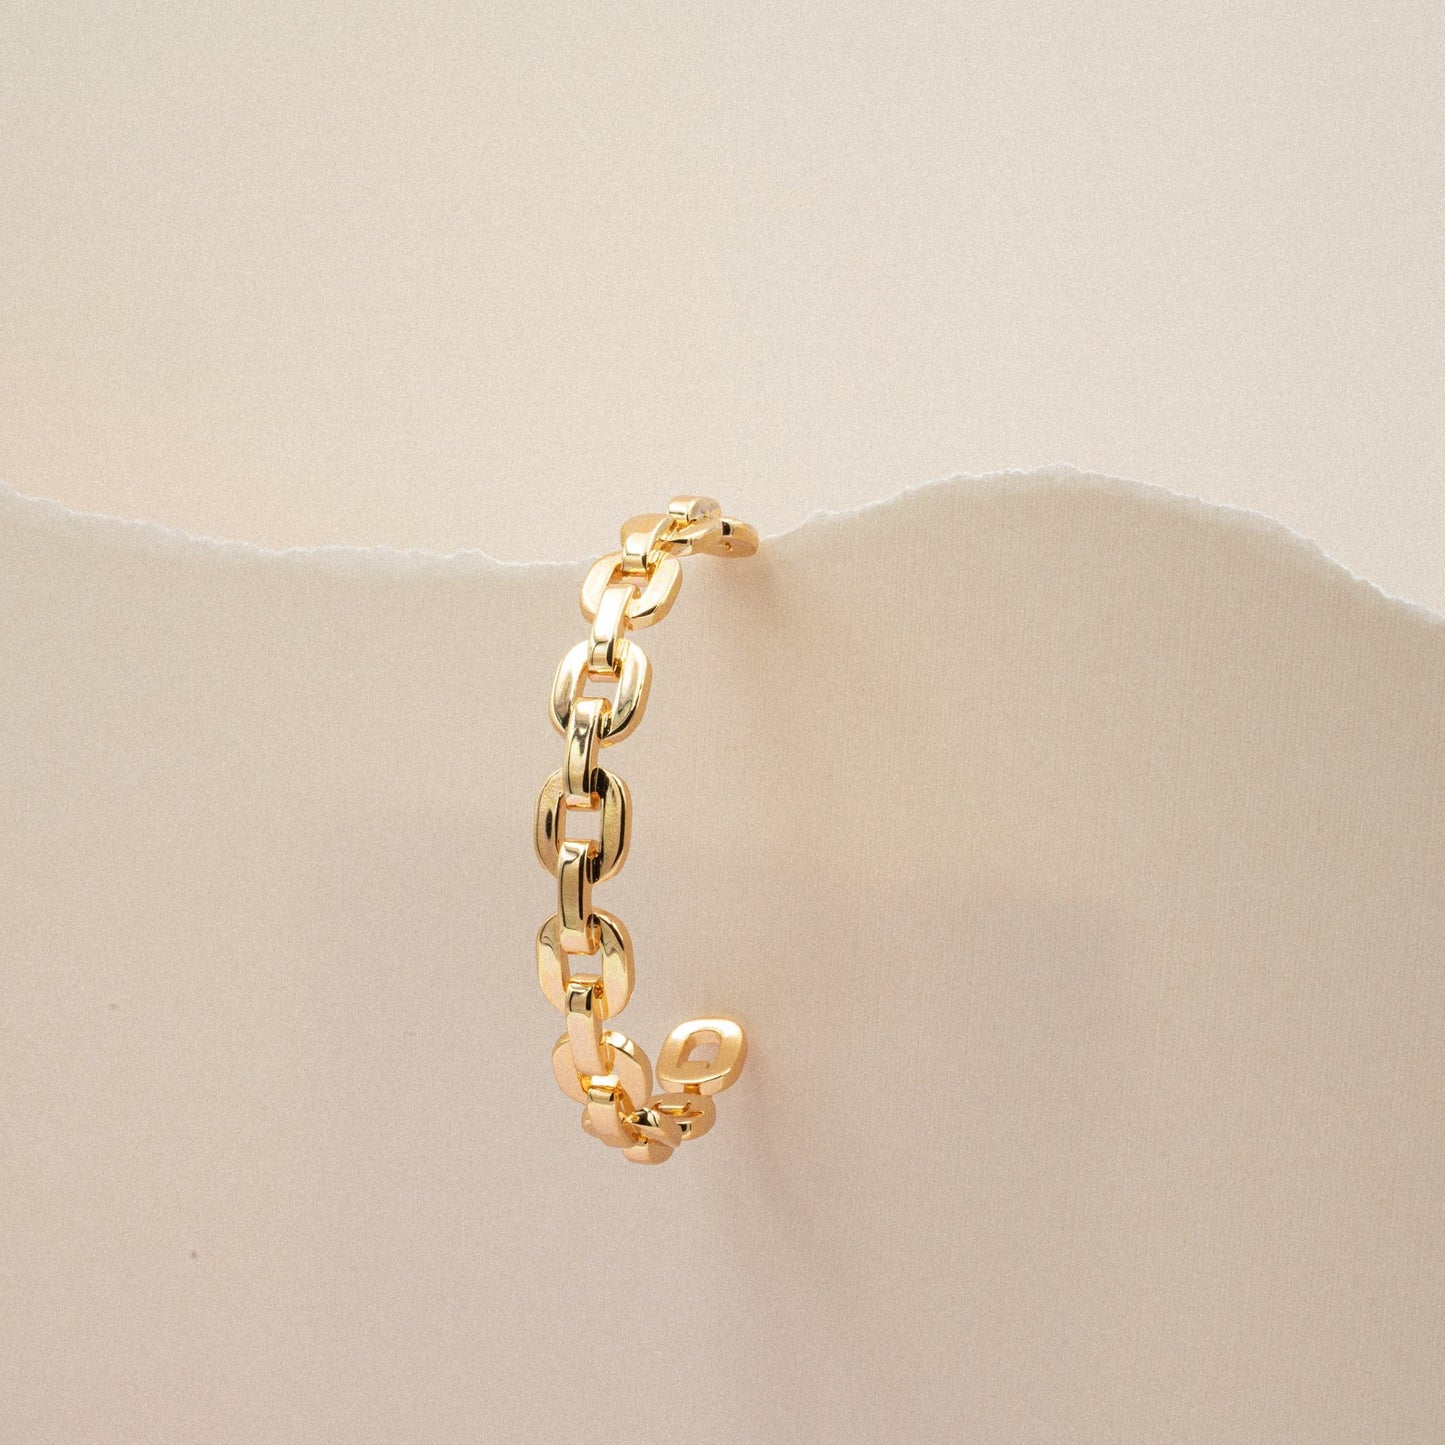 Small-Link-Chain-Cuff-Bracelets-Gold-Color-Brass-Bangles-1